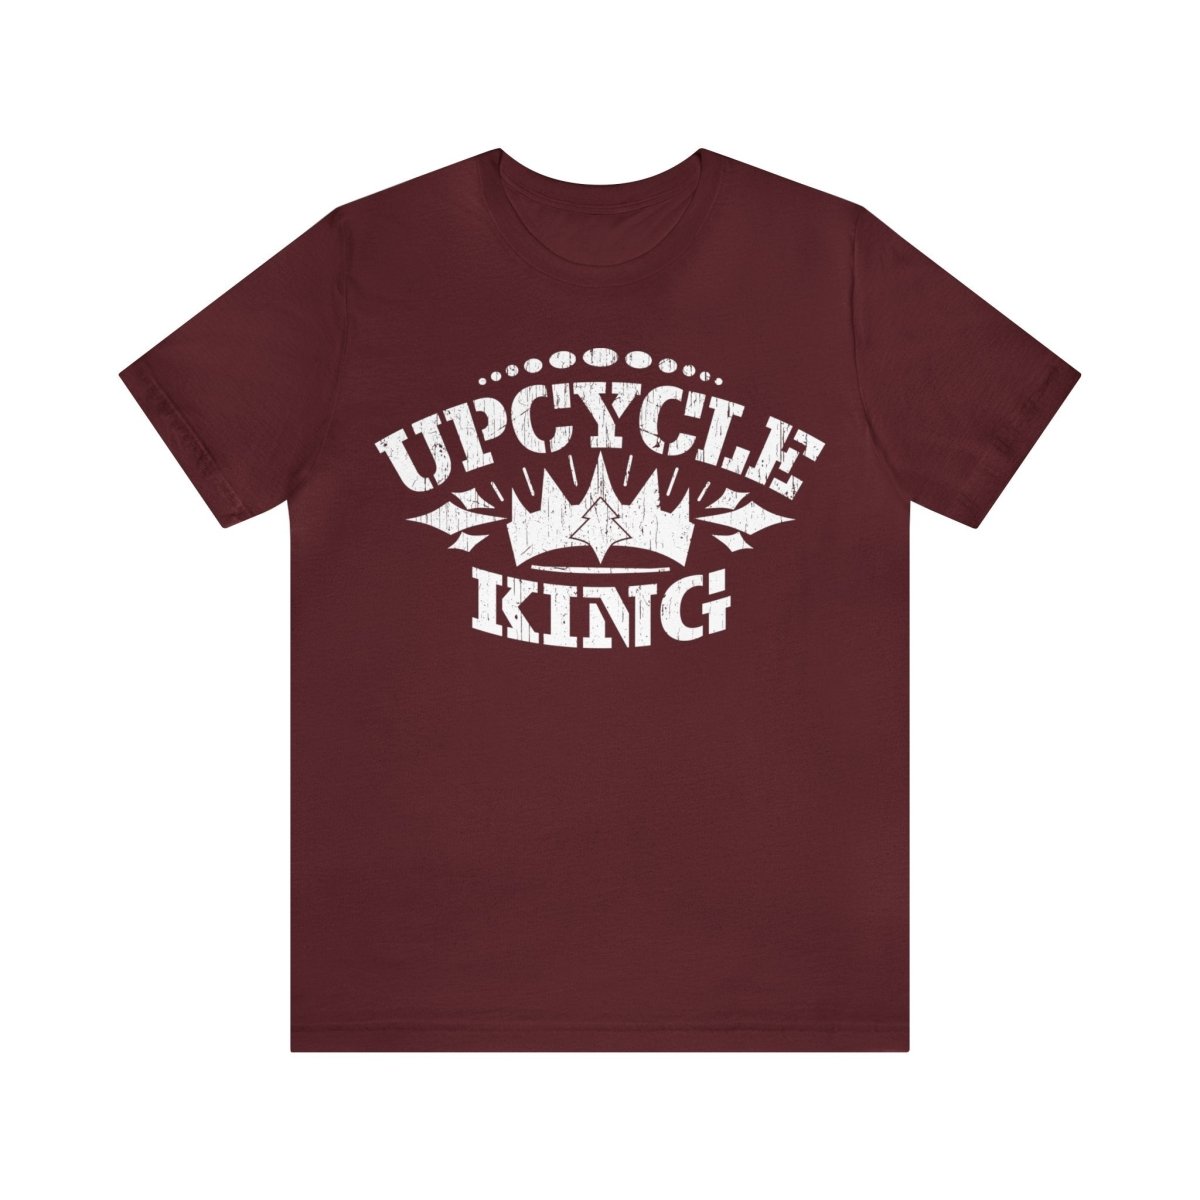 Upcycle King Premium T-Shirt, ReUse, Remake, Redo, DIY, Recycle, Self Reliance, Fix It, Self Sufficient, Junkin' Genius